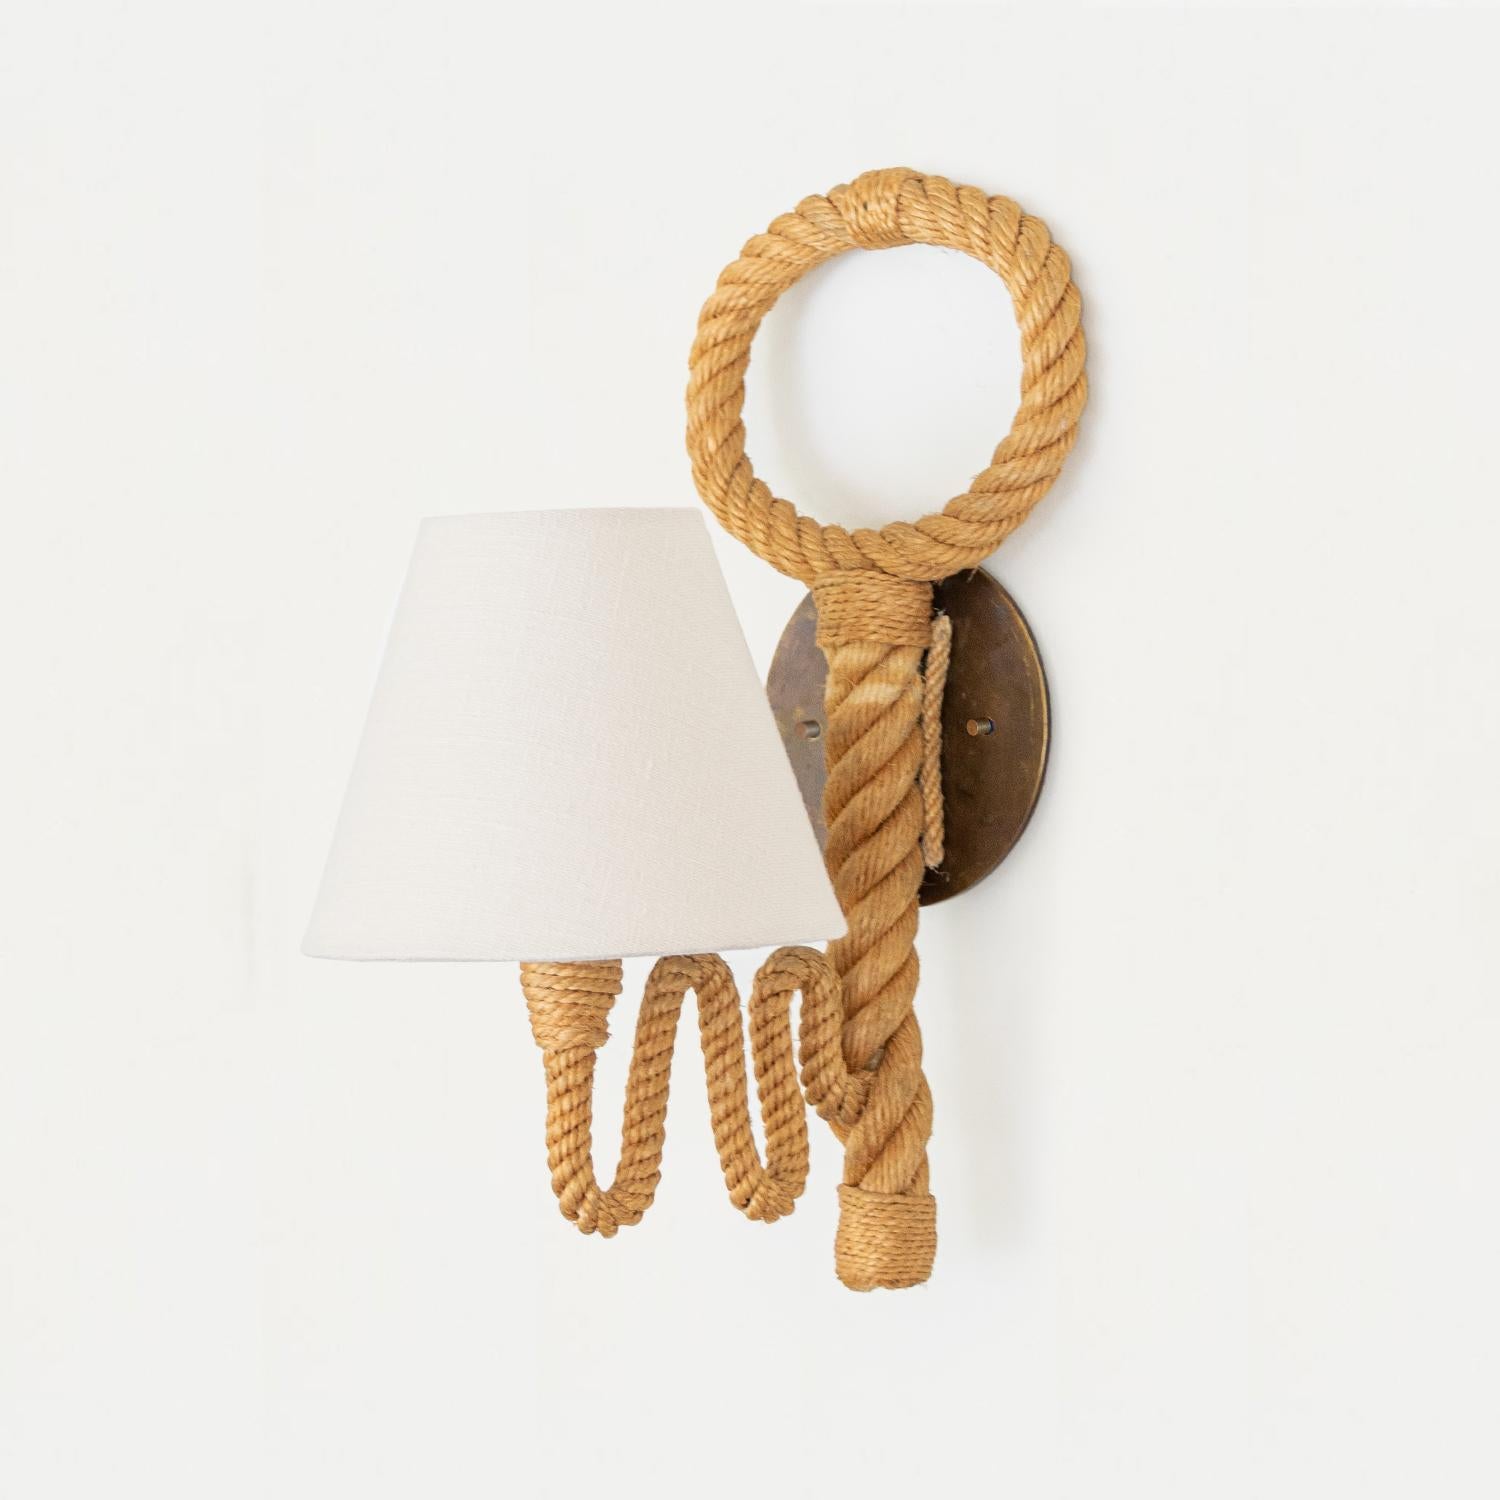 Unique vintage French rope sconce by French designers Adrien Audoux and Frida Minet. Thick twisted rope stem with wavy rope arm extending to hold single socket and shade. Large loop detail on back with new circular brass backplate and new